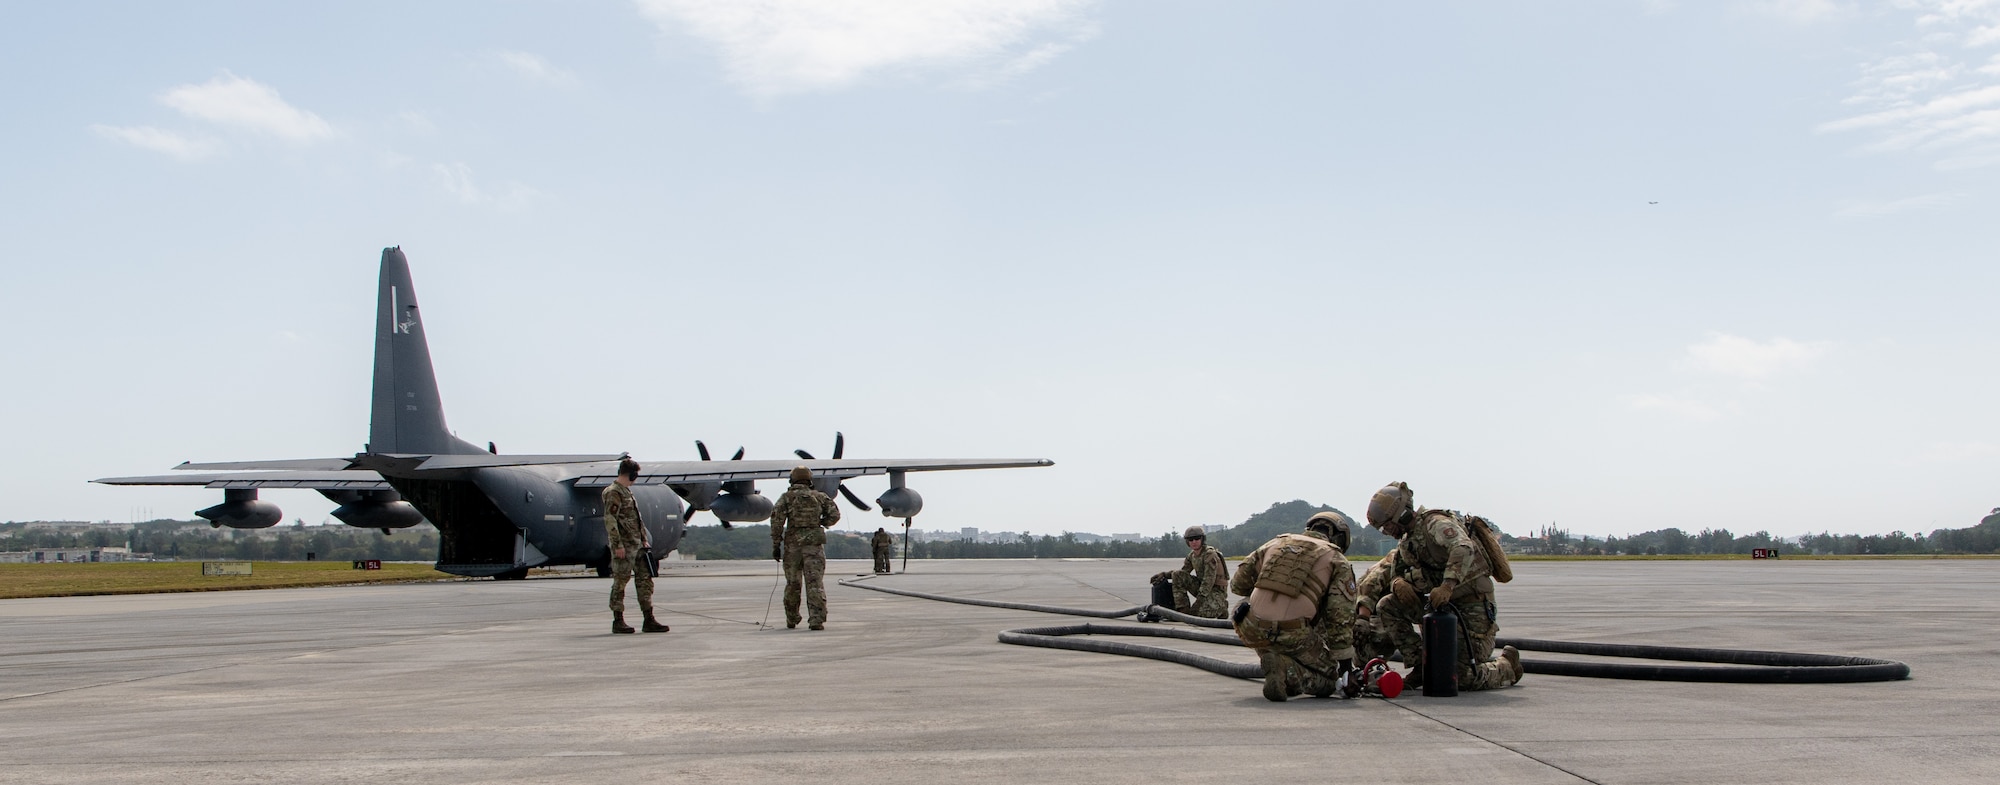 A transport plane is prepared for refueling operations by several Airmen.